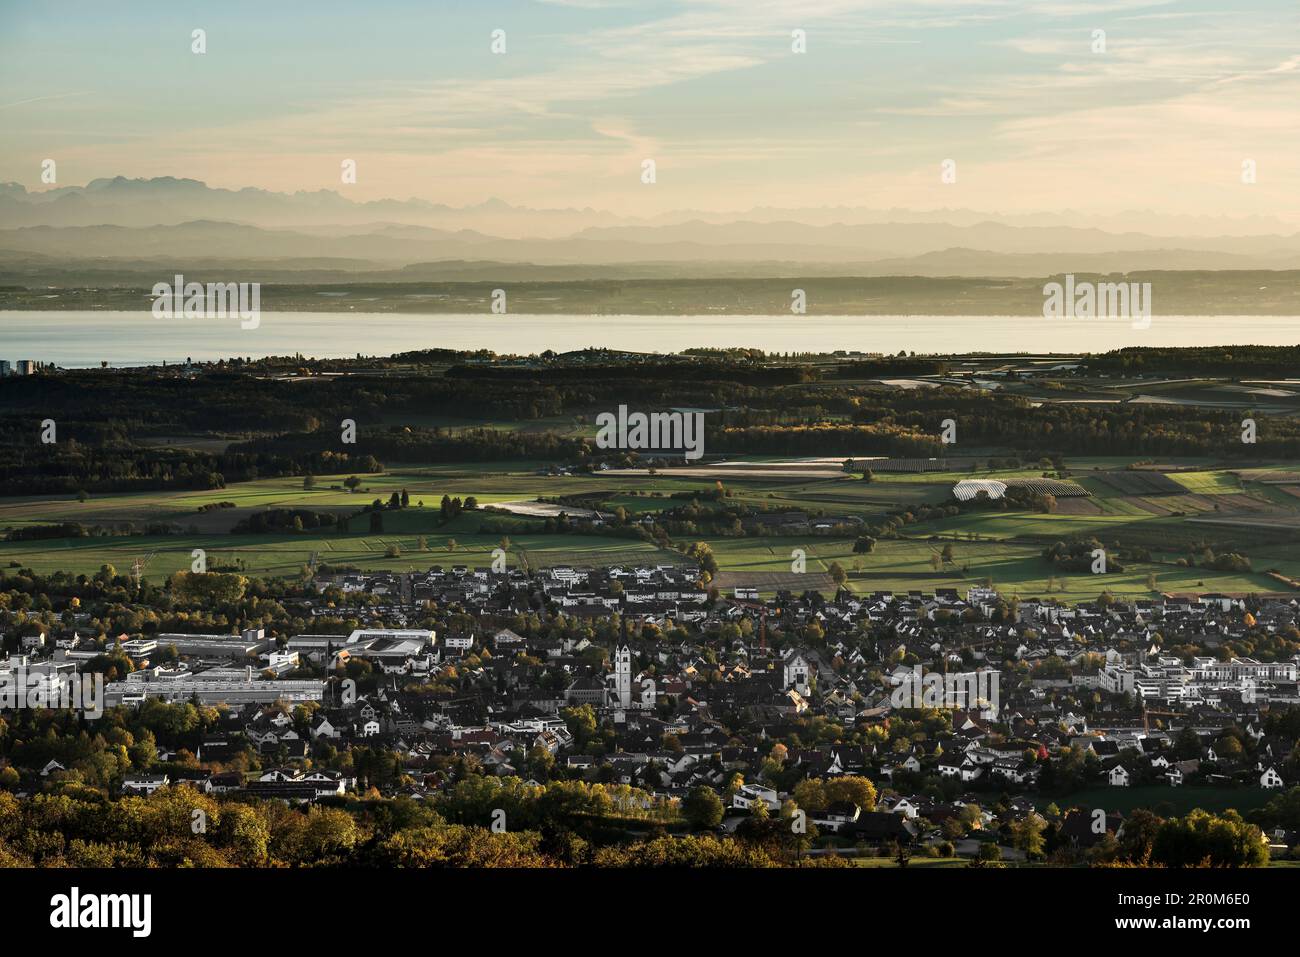 Markdorf, Lake Constance with Swiss Alps, view from Gehrenberg, Linzgau, Lake Constance, Baden-Württemberg, Germany Stock Photo